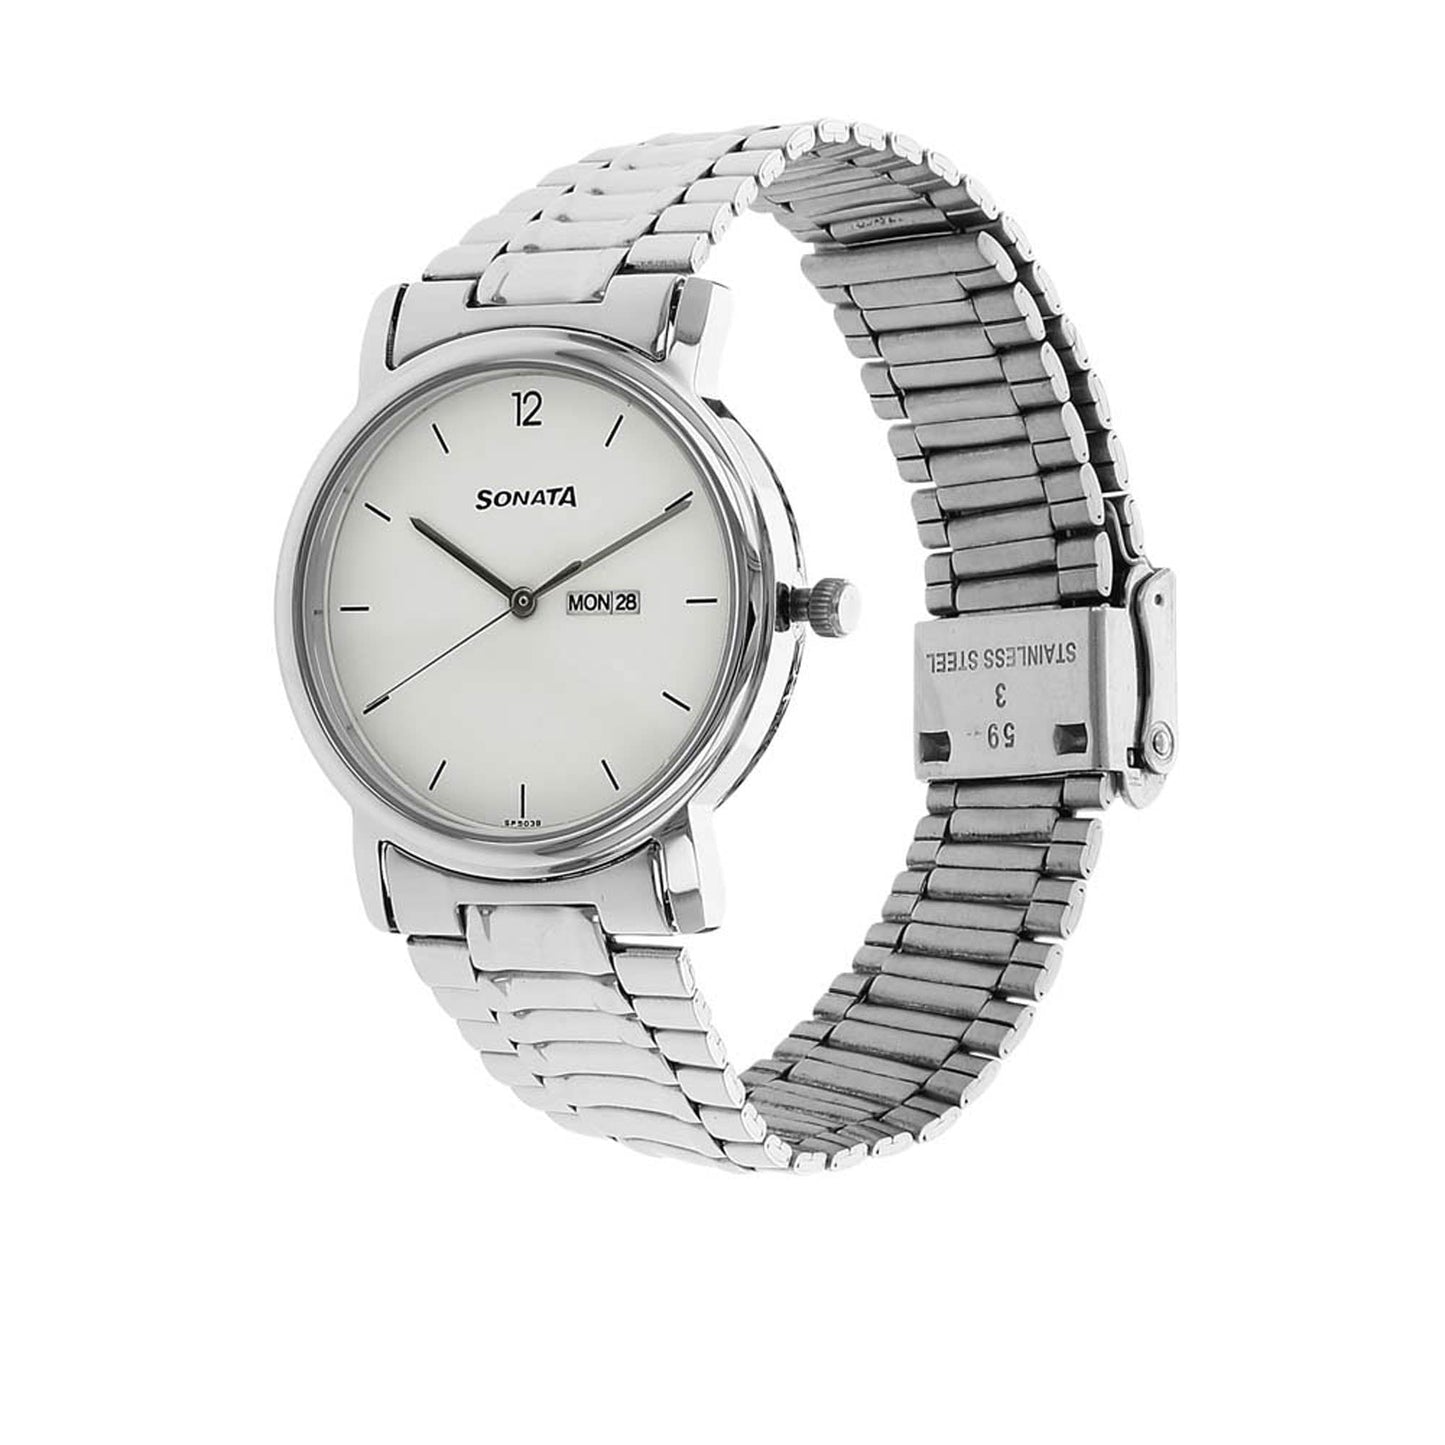 Sonata Quartz Analog with Day and Date White Dial Stainless Steel Strap Watch for Men